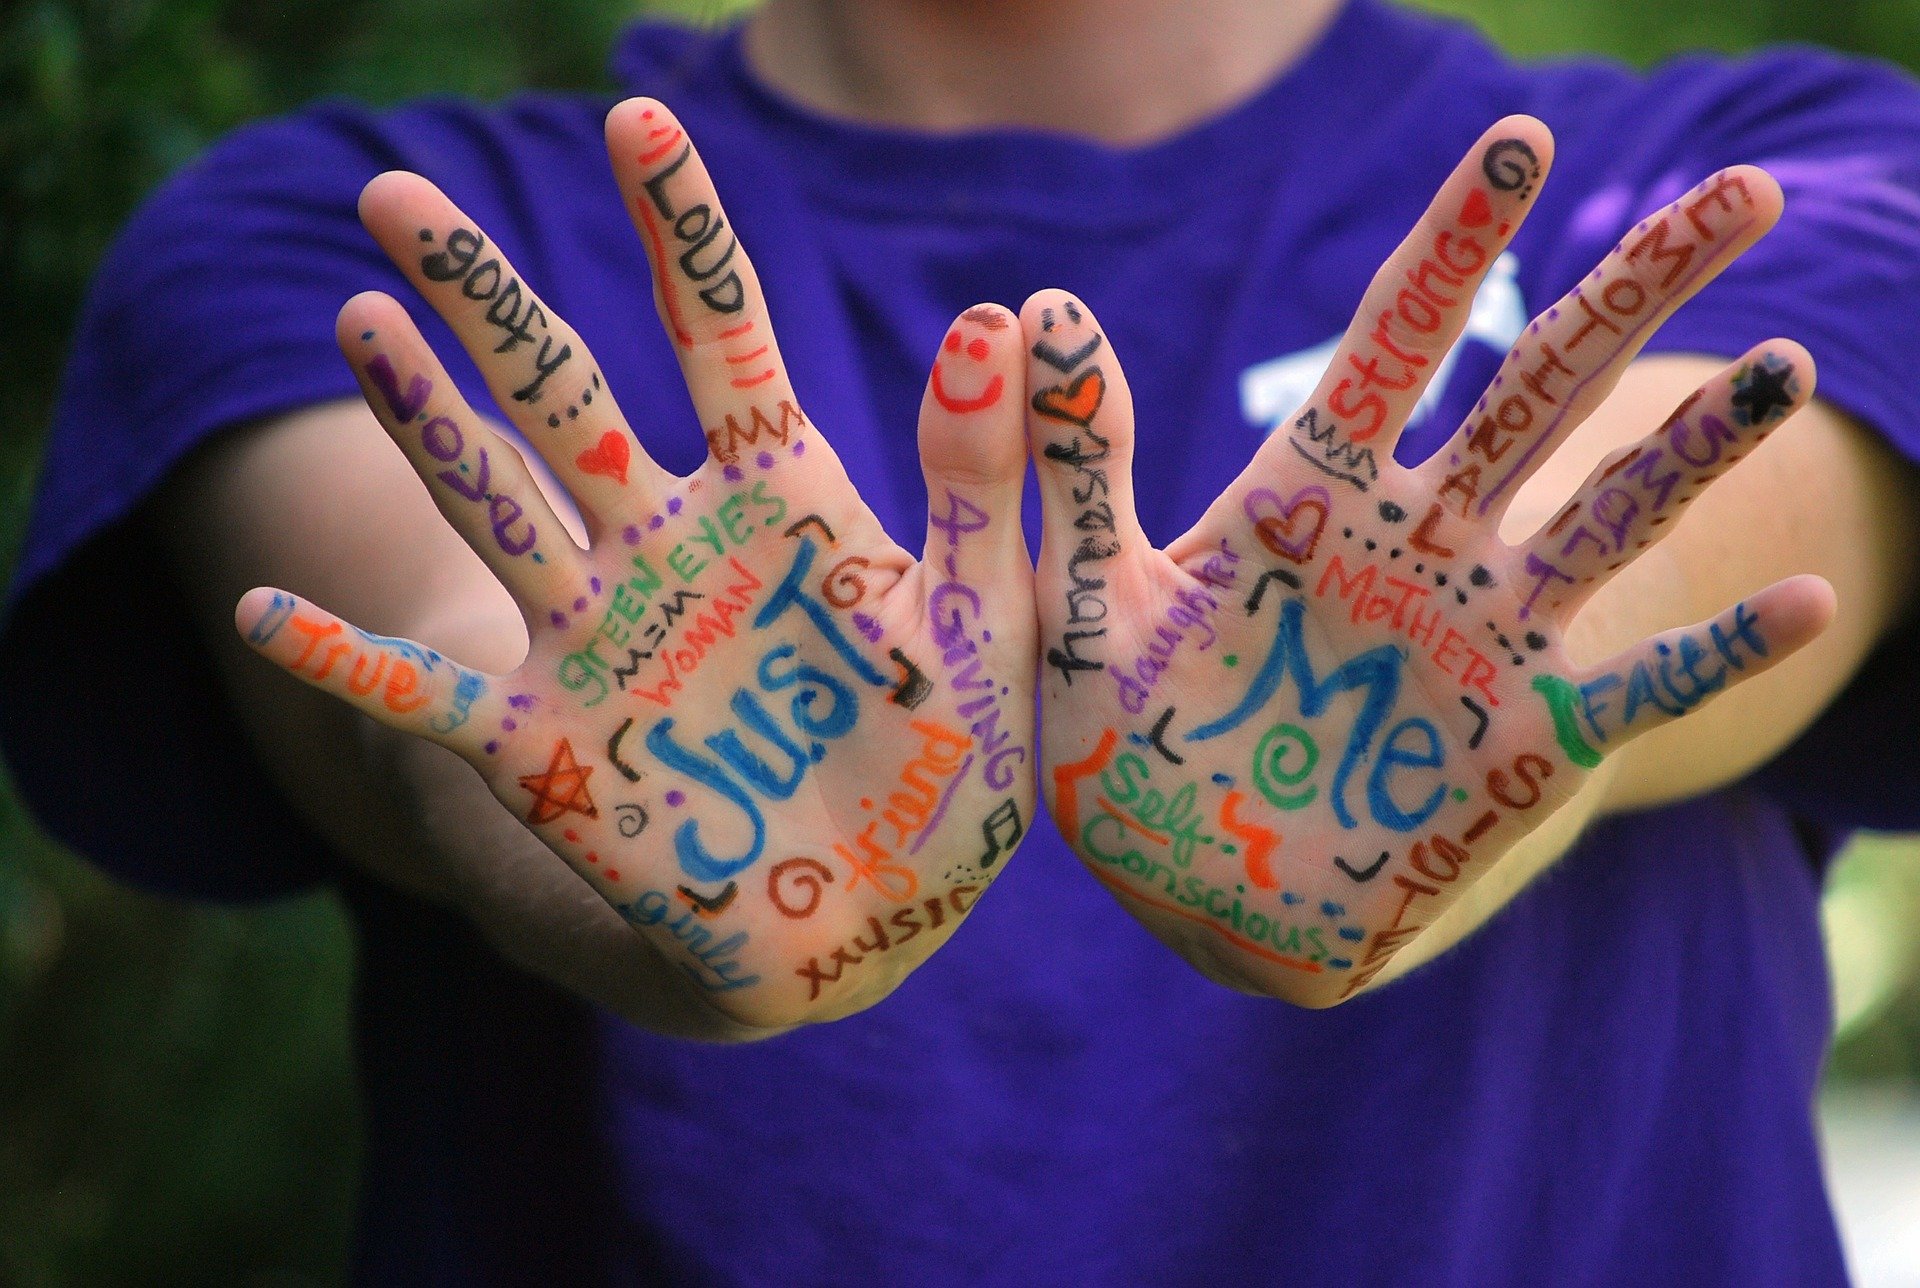 The palms of two hands with the words "Just Me" written across the palms with other colourful words surrounding